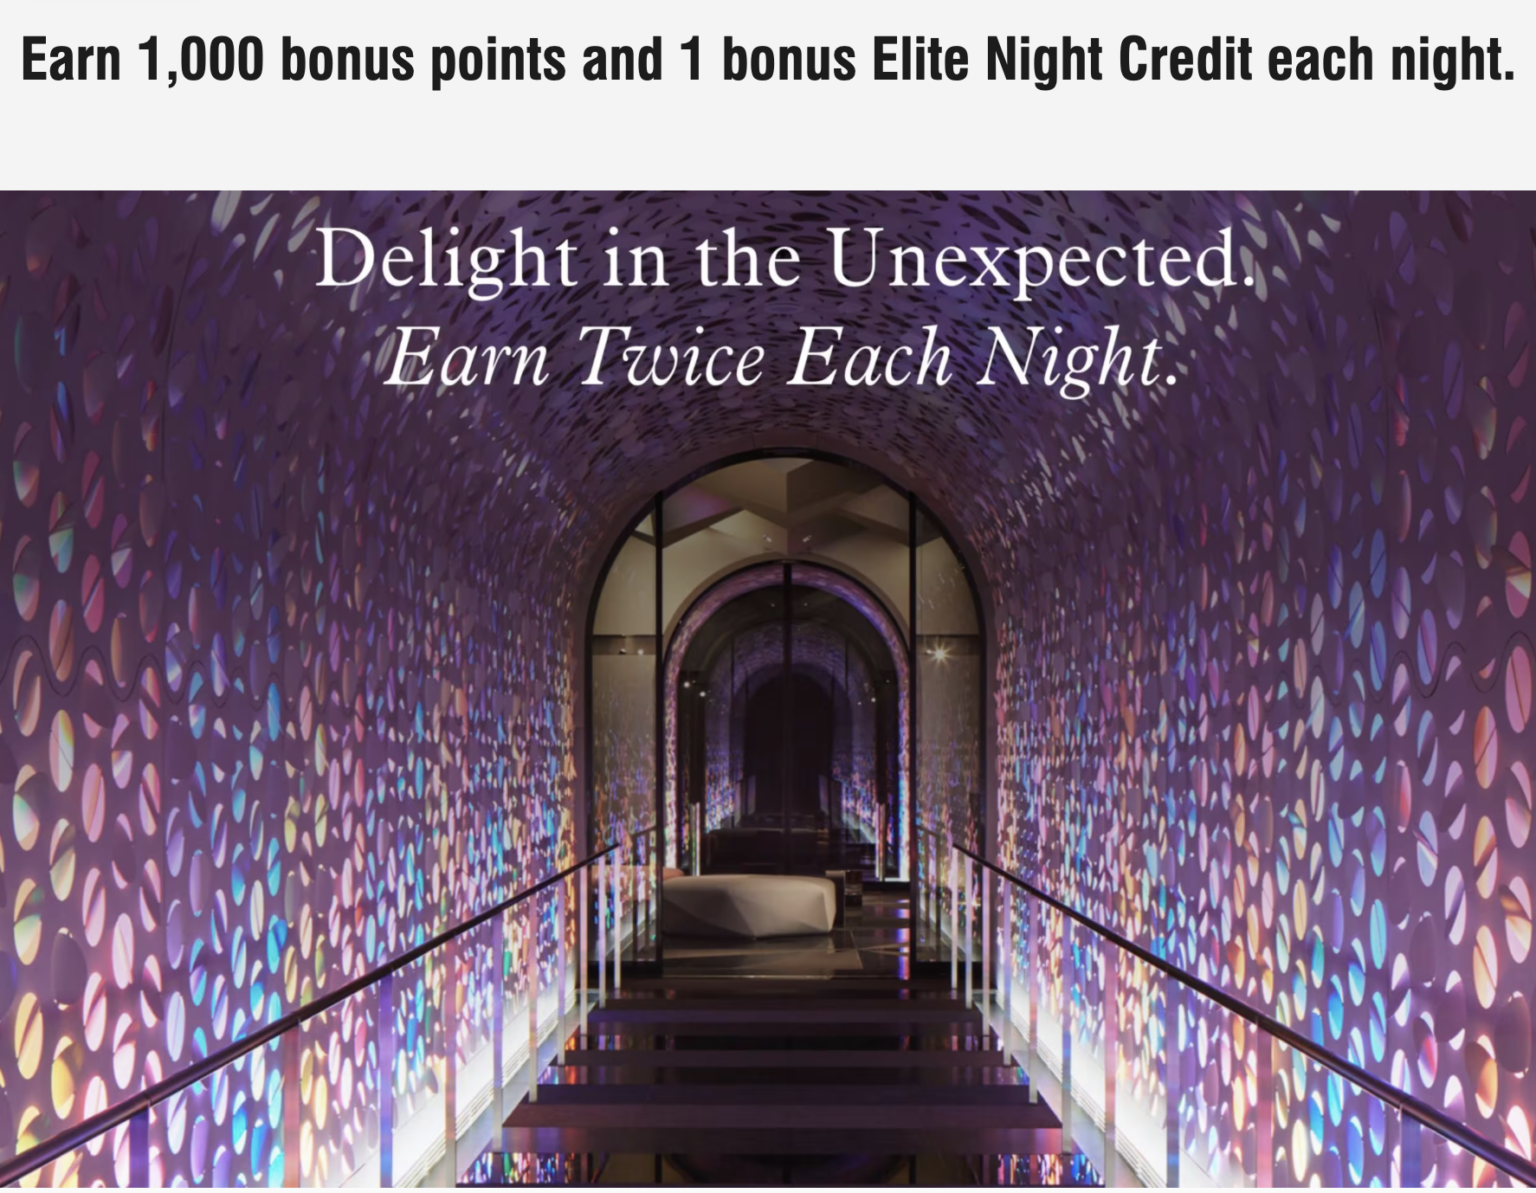 Now Live Marriott’s First Global Promotion for 2023. Earn Double Elite